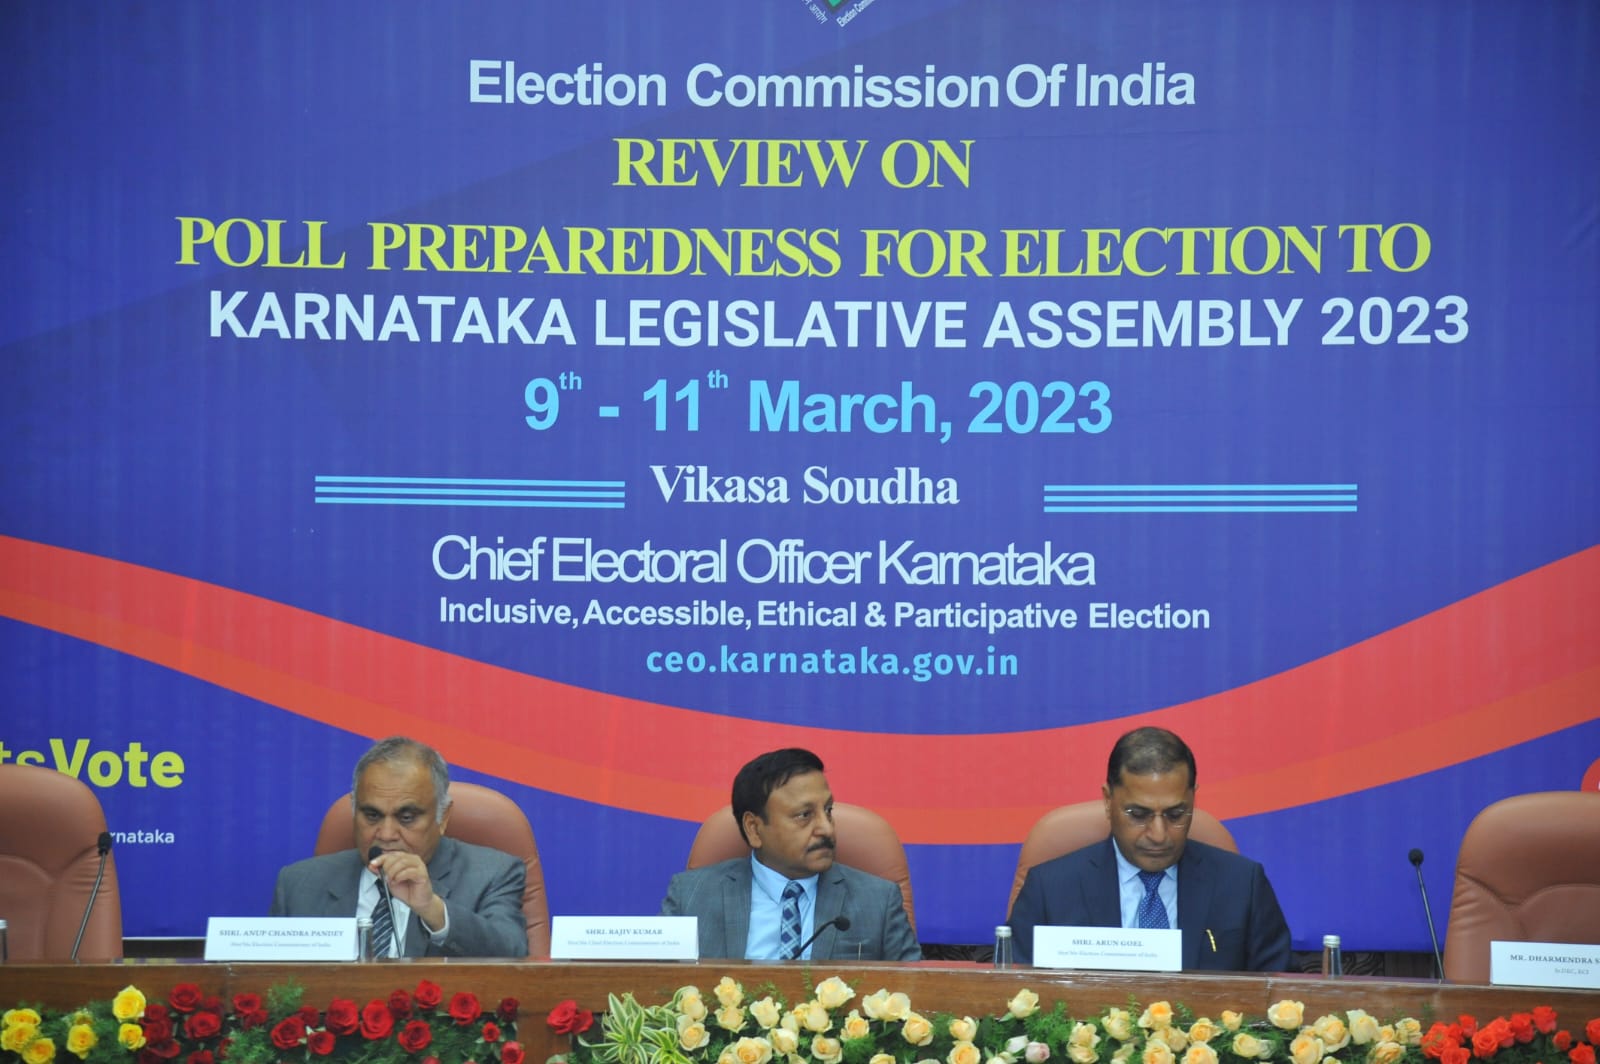 Karnataka Assembly polls: EC to introduce Vote From Home option for voters above 80 years